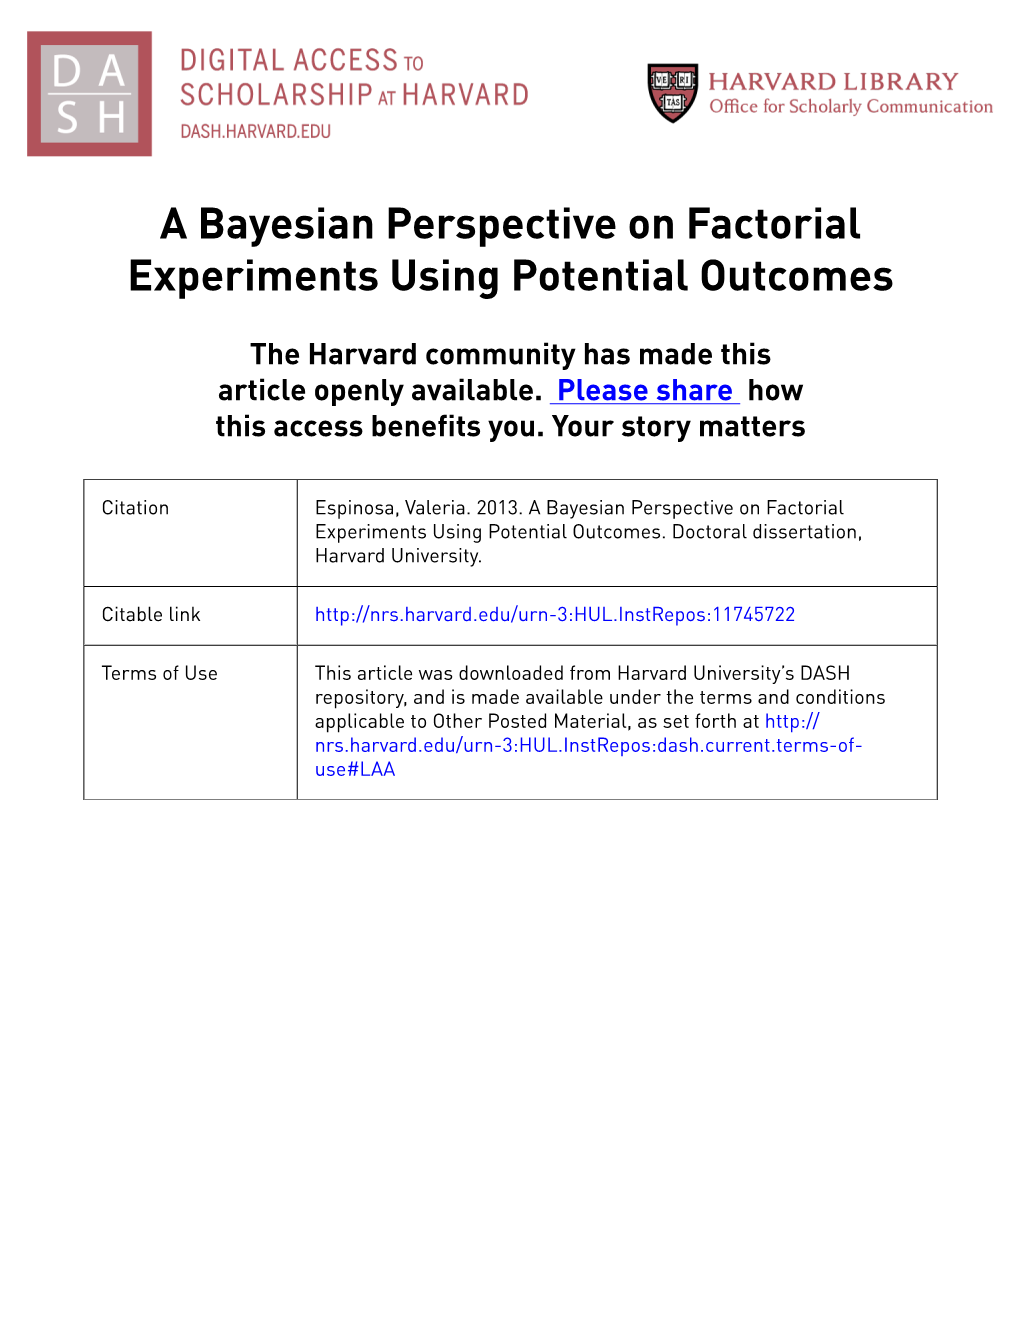 A Bayesian Perspective on Factorial Experiments Using Potential Outcomes